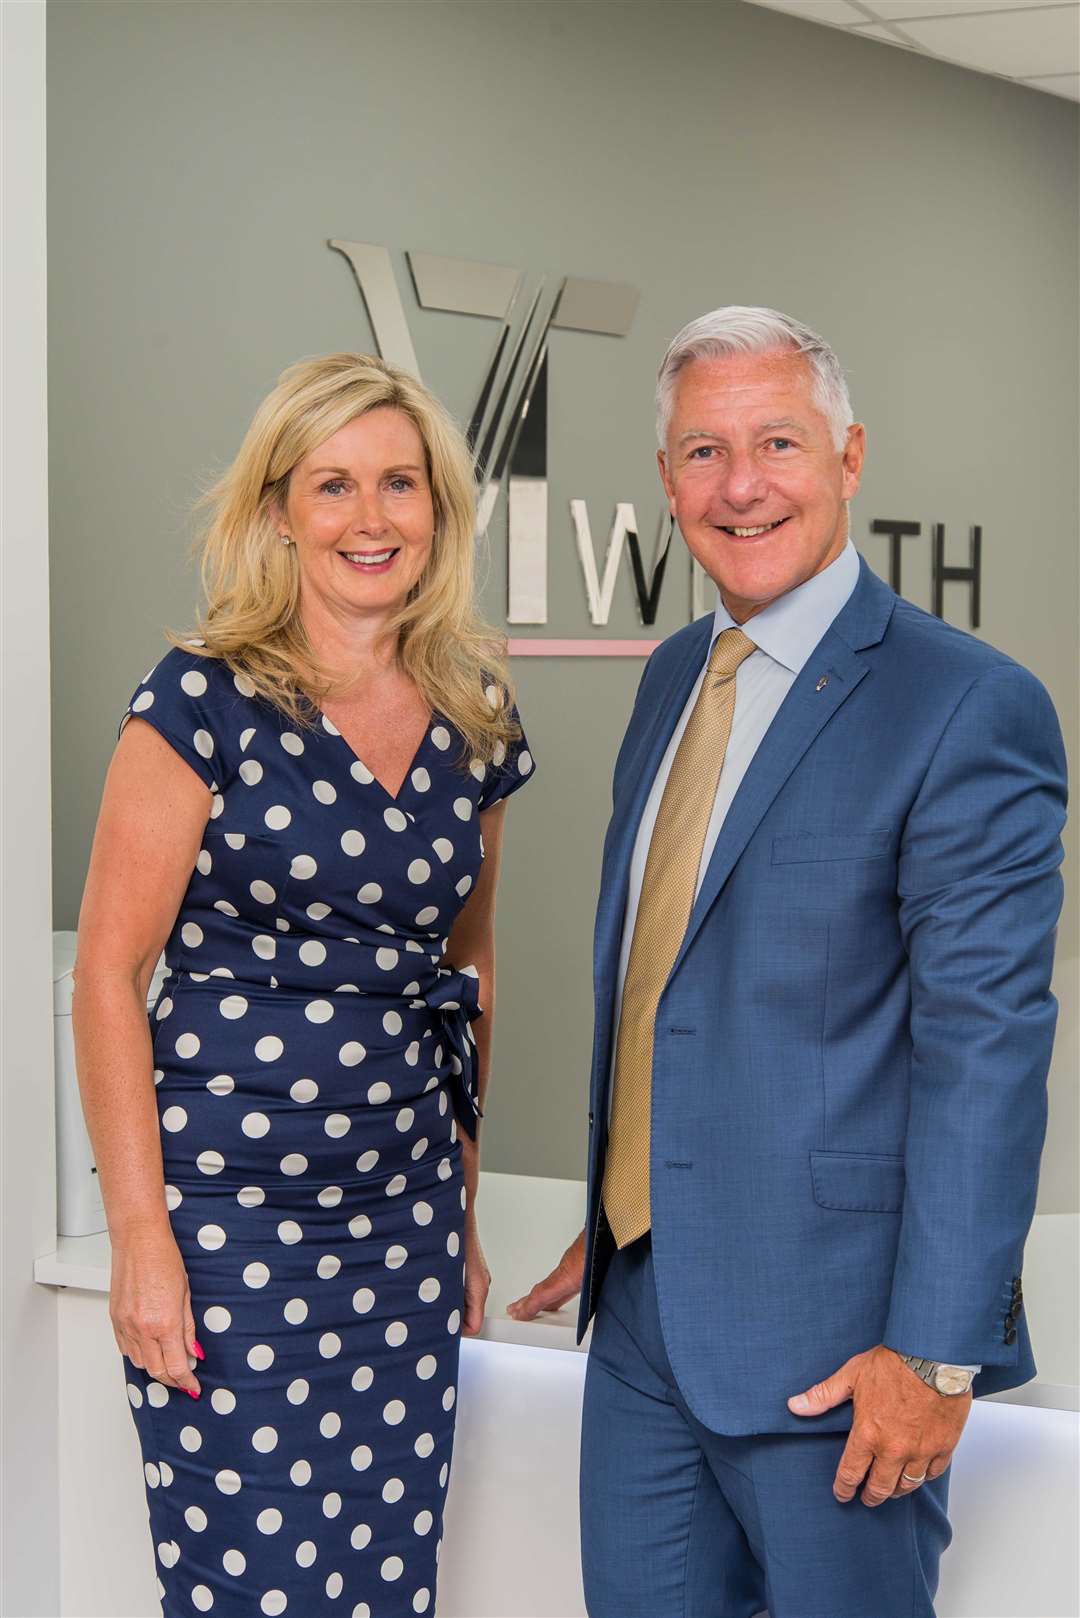 Husband and wife Vee and George Thom, who head up VT Wealth in Aberdeen and Fraserburgh.